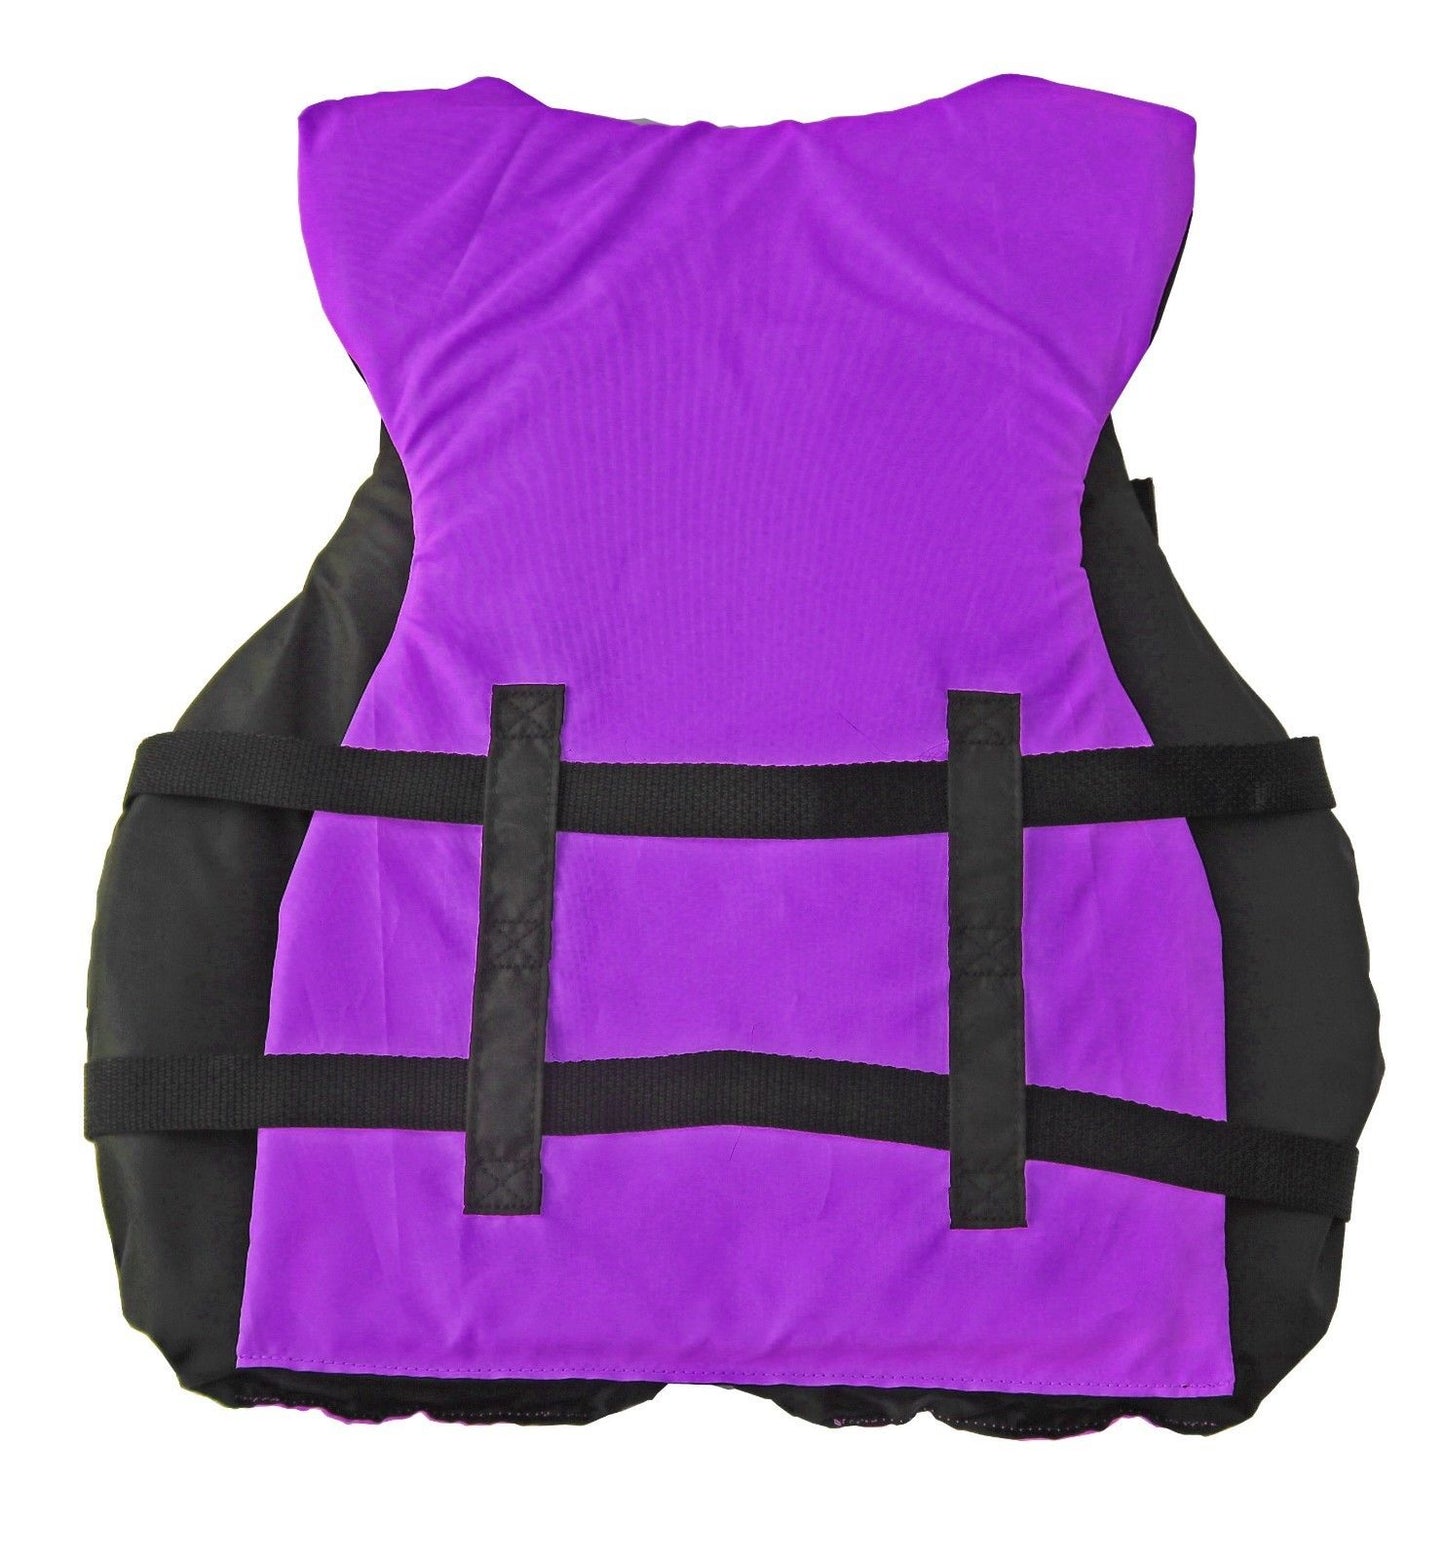 High Visibility USCG Approved Life Jackets for the Whole Family